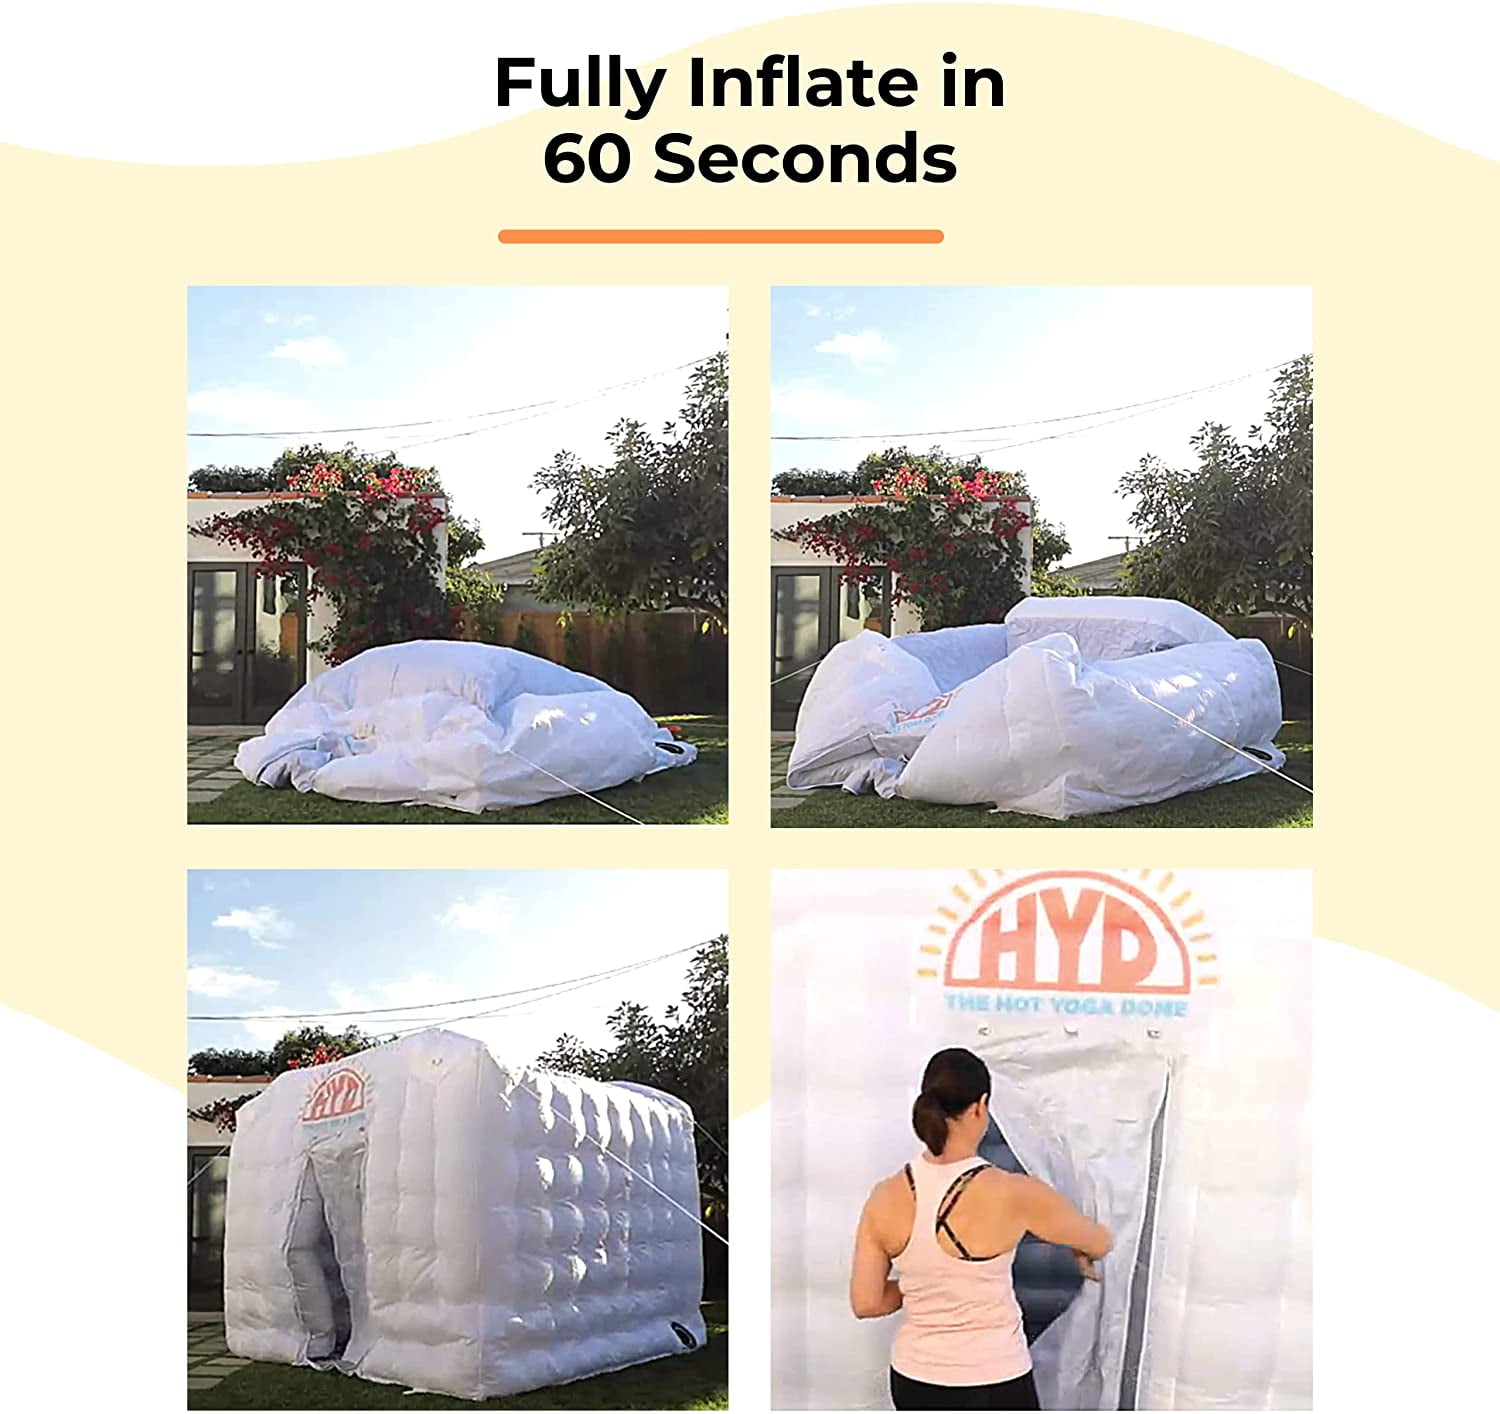 The Hot Yoga Dome, Portable, Lightweight & Easy Set Up Inflatable Hot Yoga  Dome Home Yoga Studio, Personal Hot Yoga Equipment for Indoor & Outdoor, Yoga & Exercise at Home